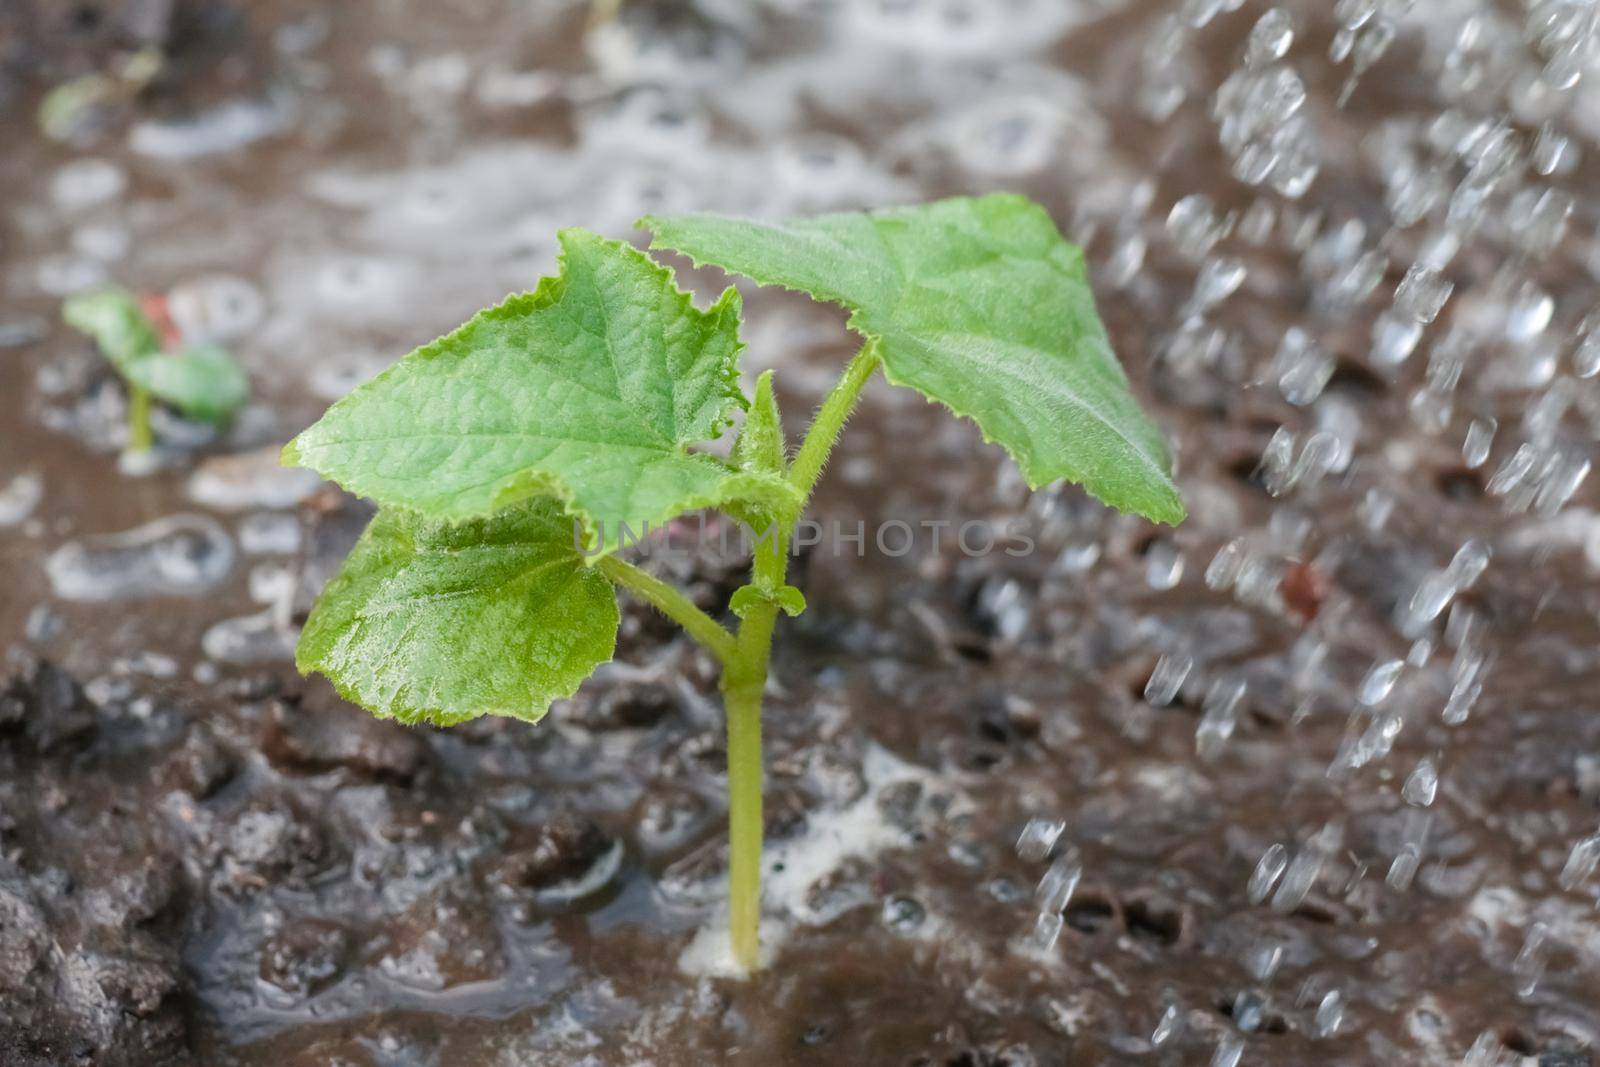 tomato sprout under water drops close-up. watering plants. High quality photo